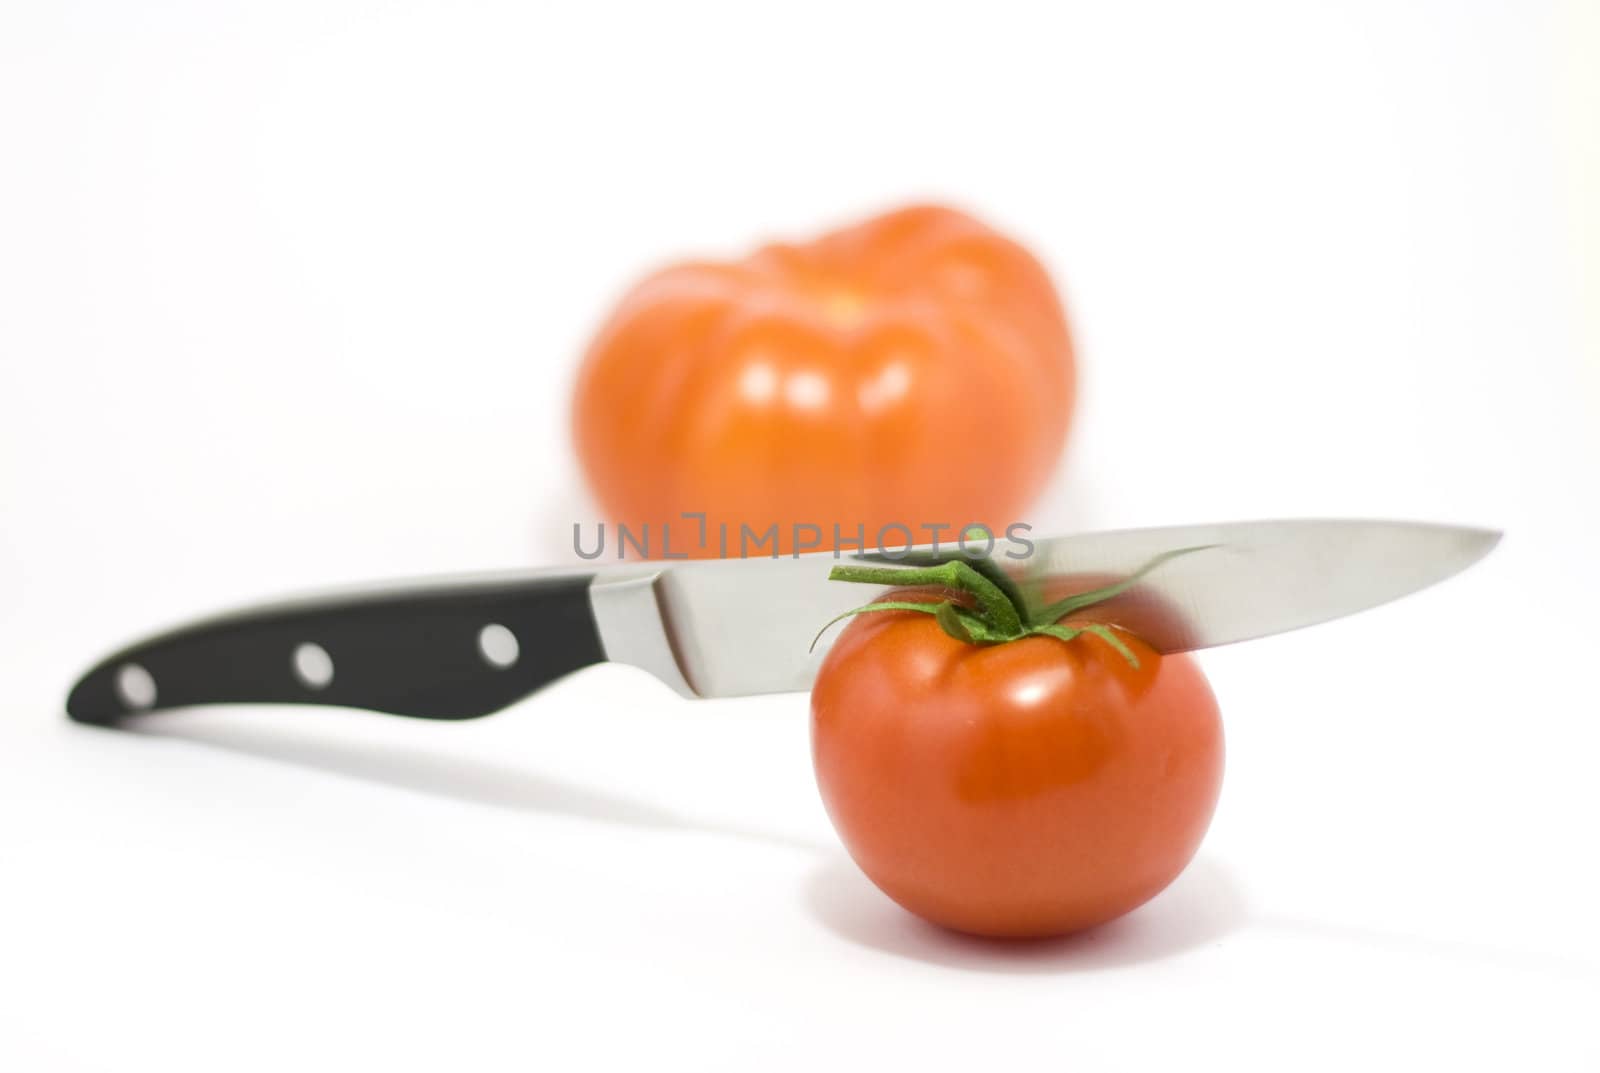 Knife and tomato by ursolv